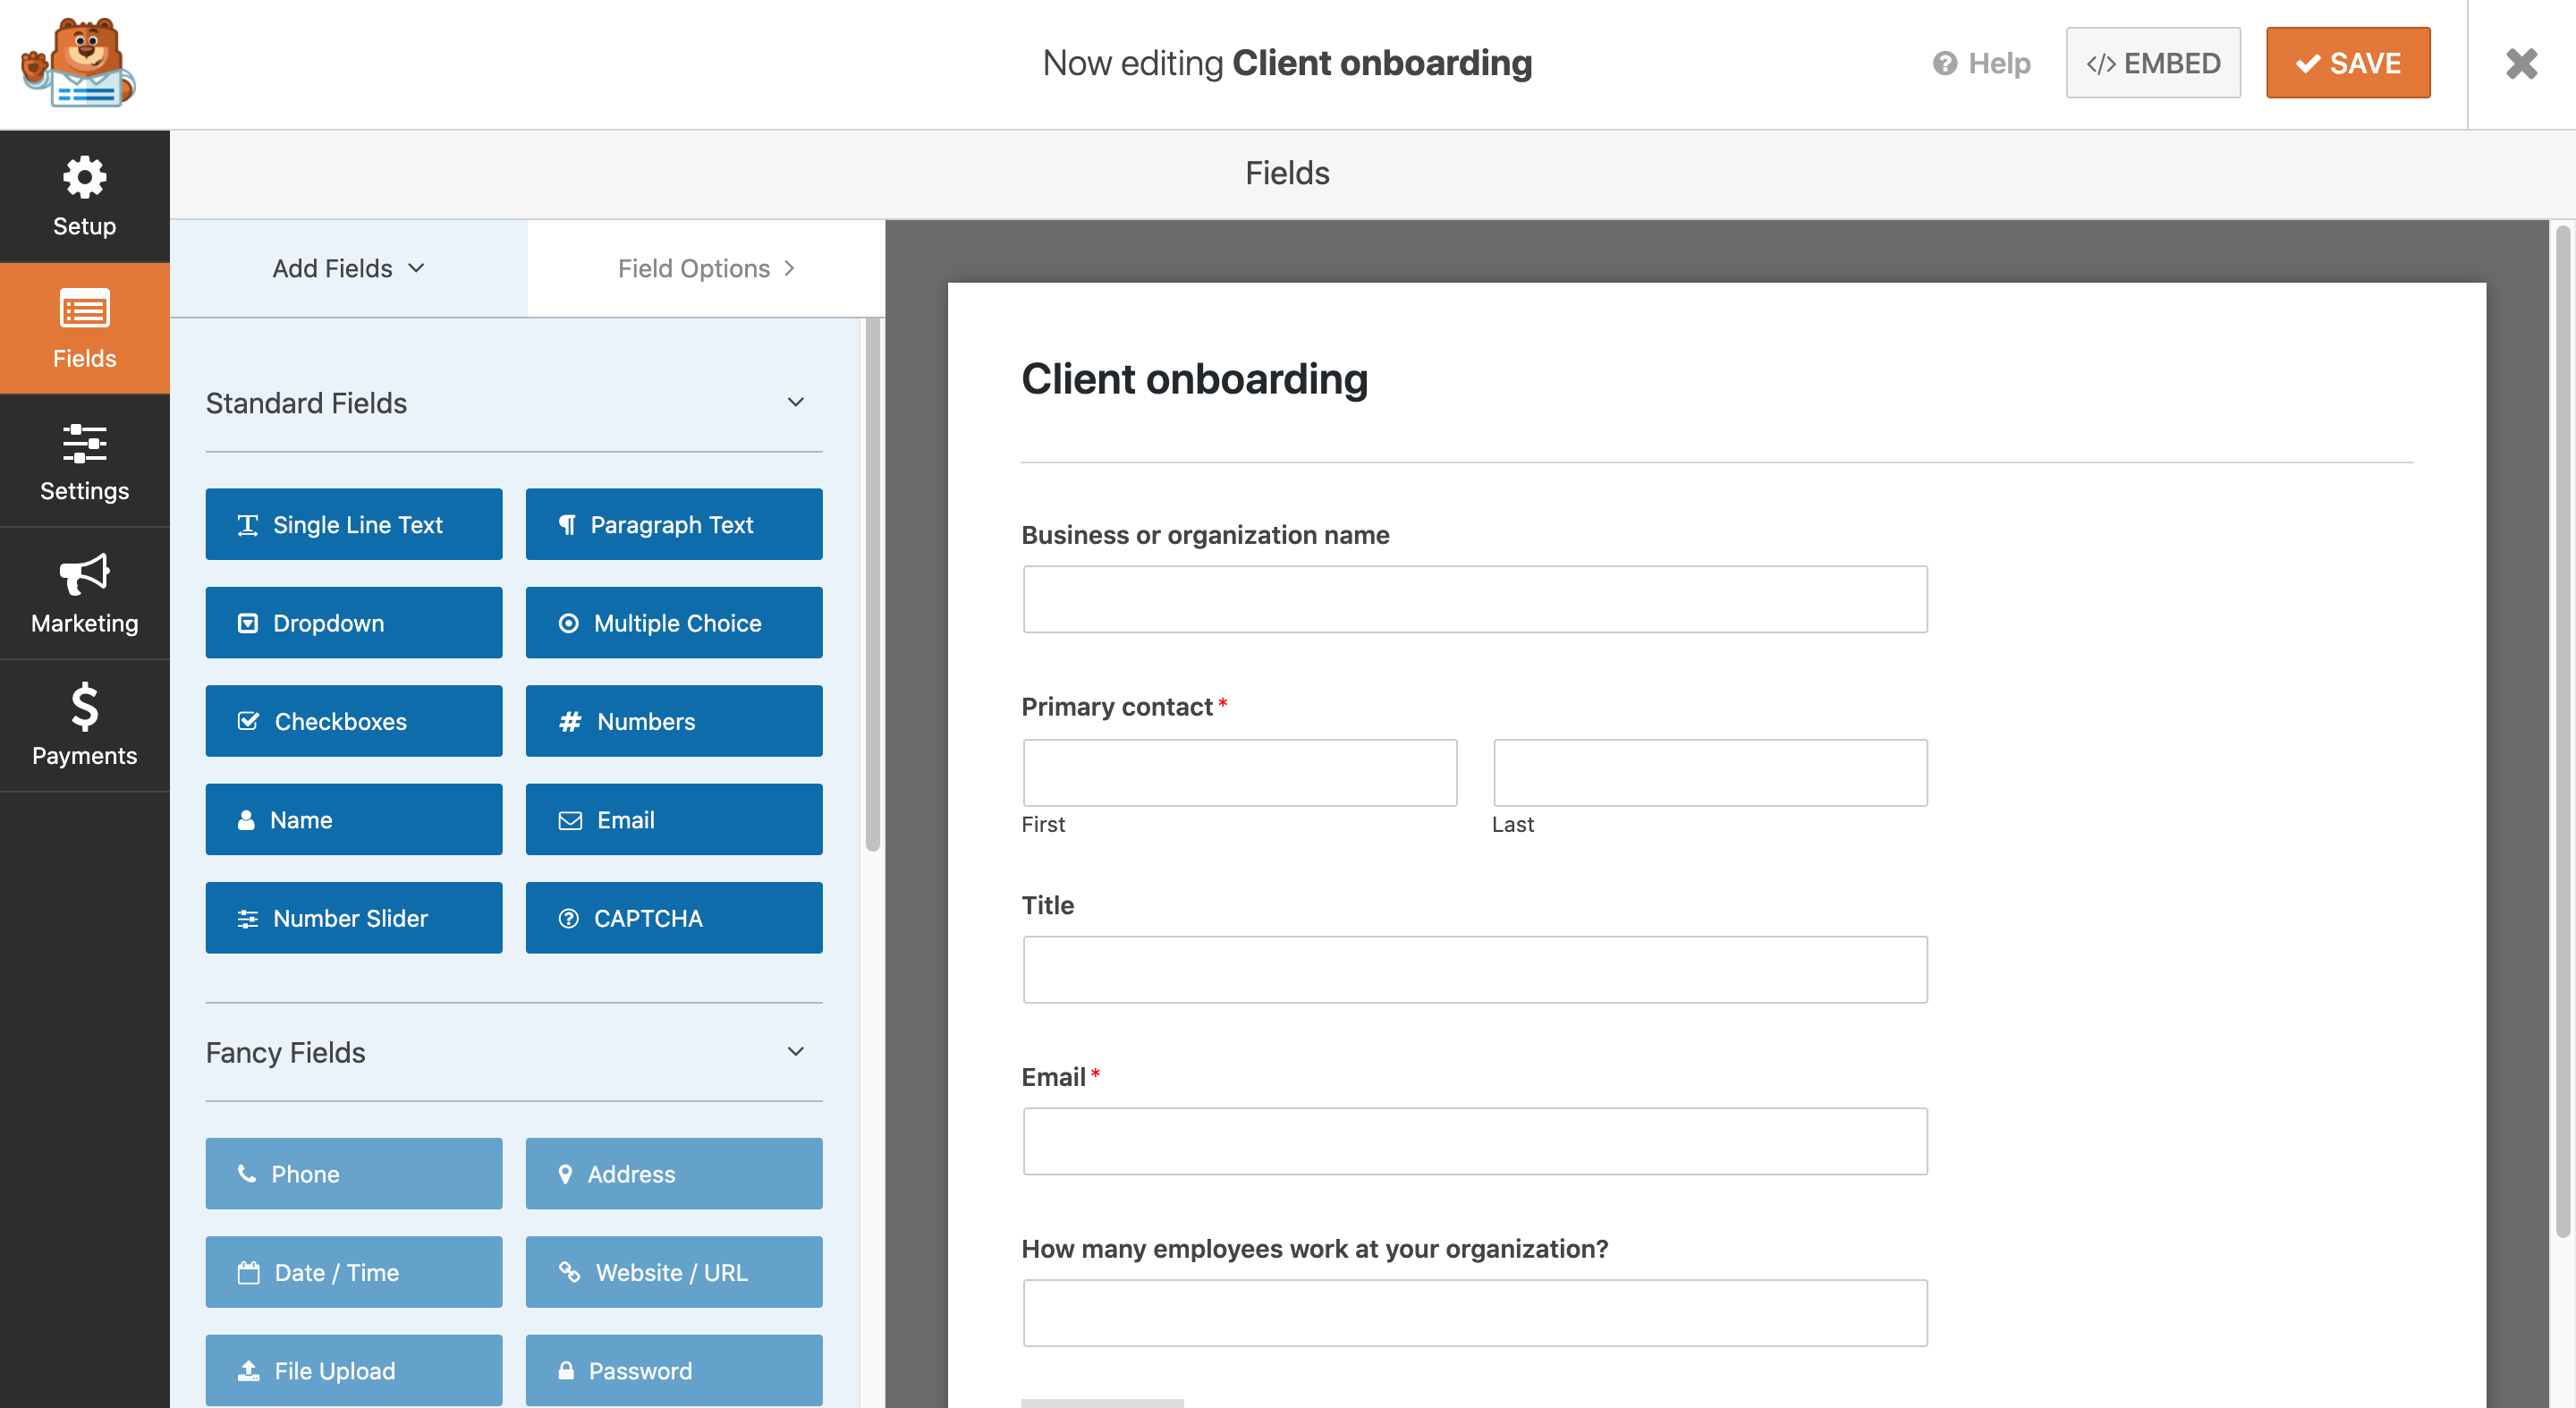 A client onboarding form created using WPForms.